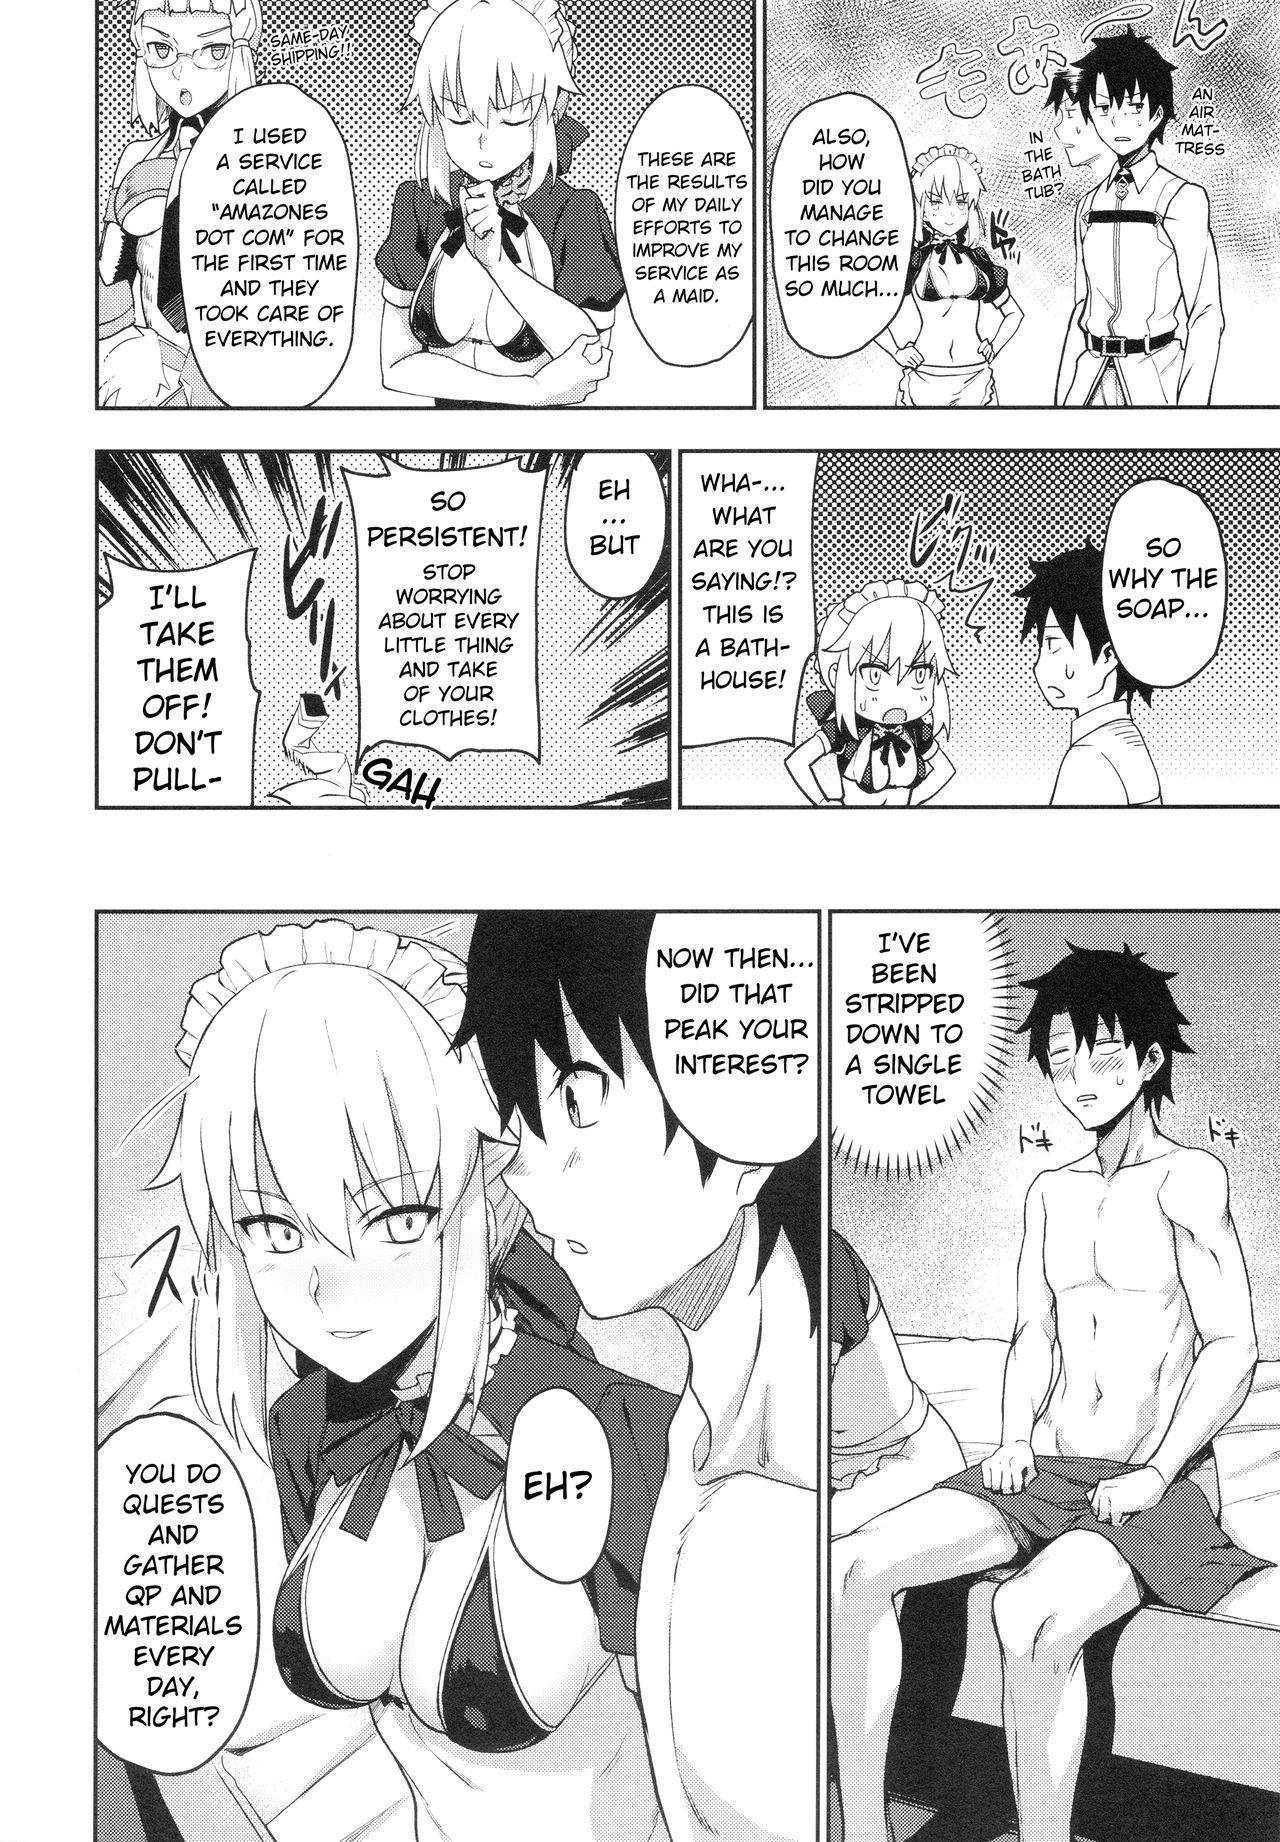 Phat Chaldea Soap SSS-kyuu Gohoushi Maid - Fate grand order Handsome - Page 4